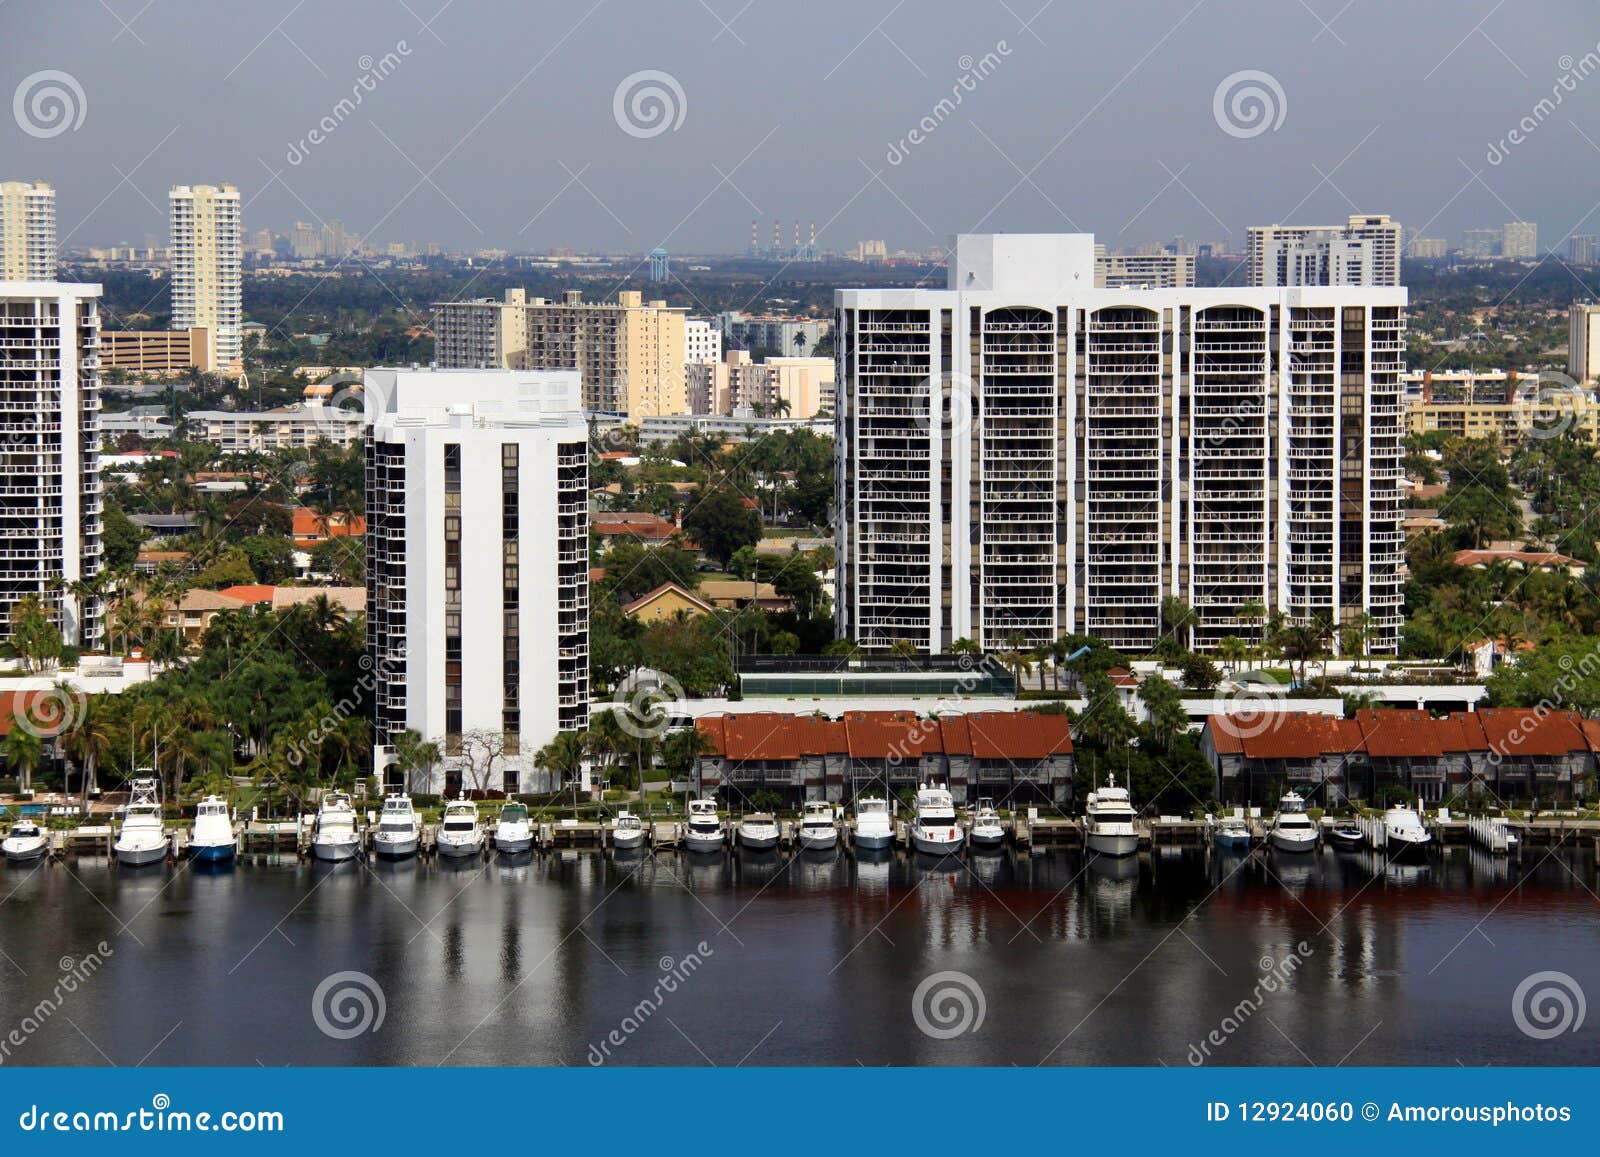 condominiums with private boat docks